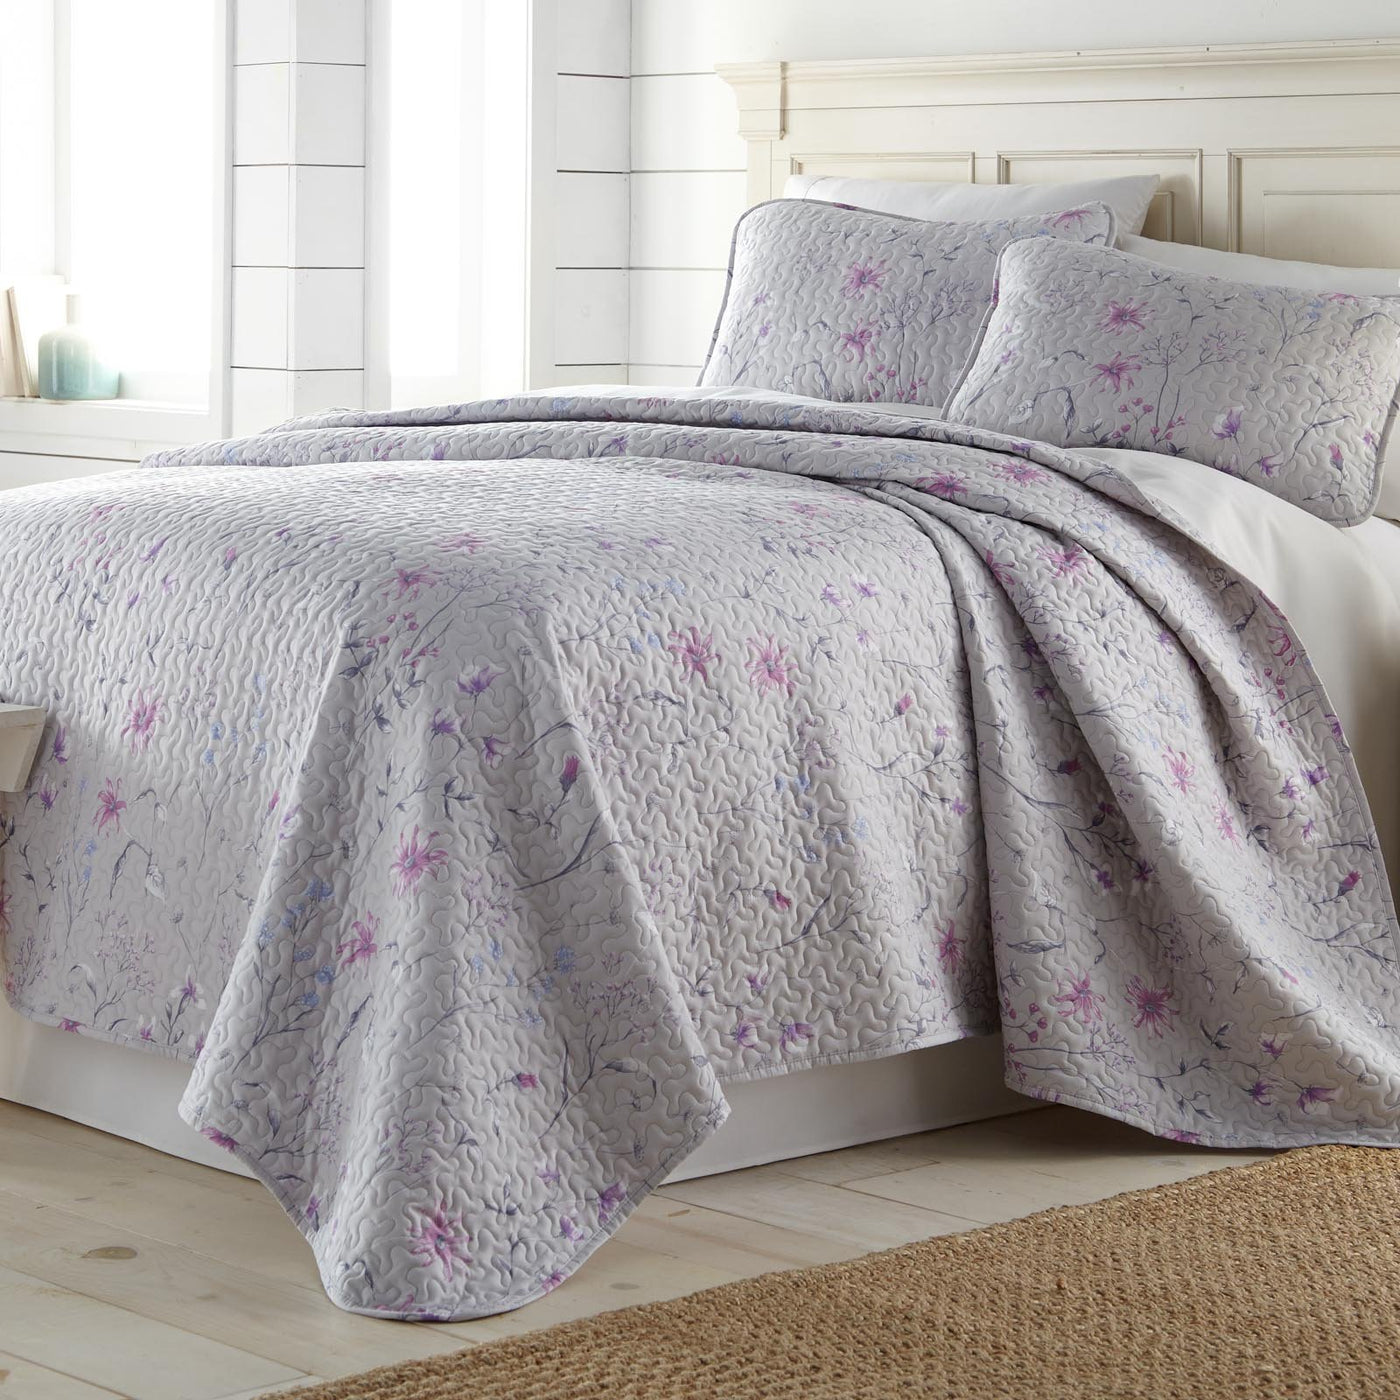 Floral Daydream in grey floral print quilt set